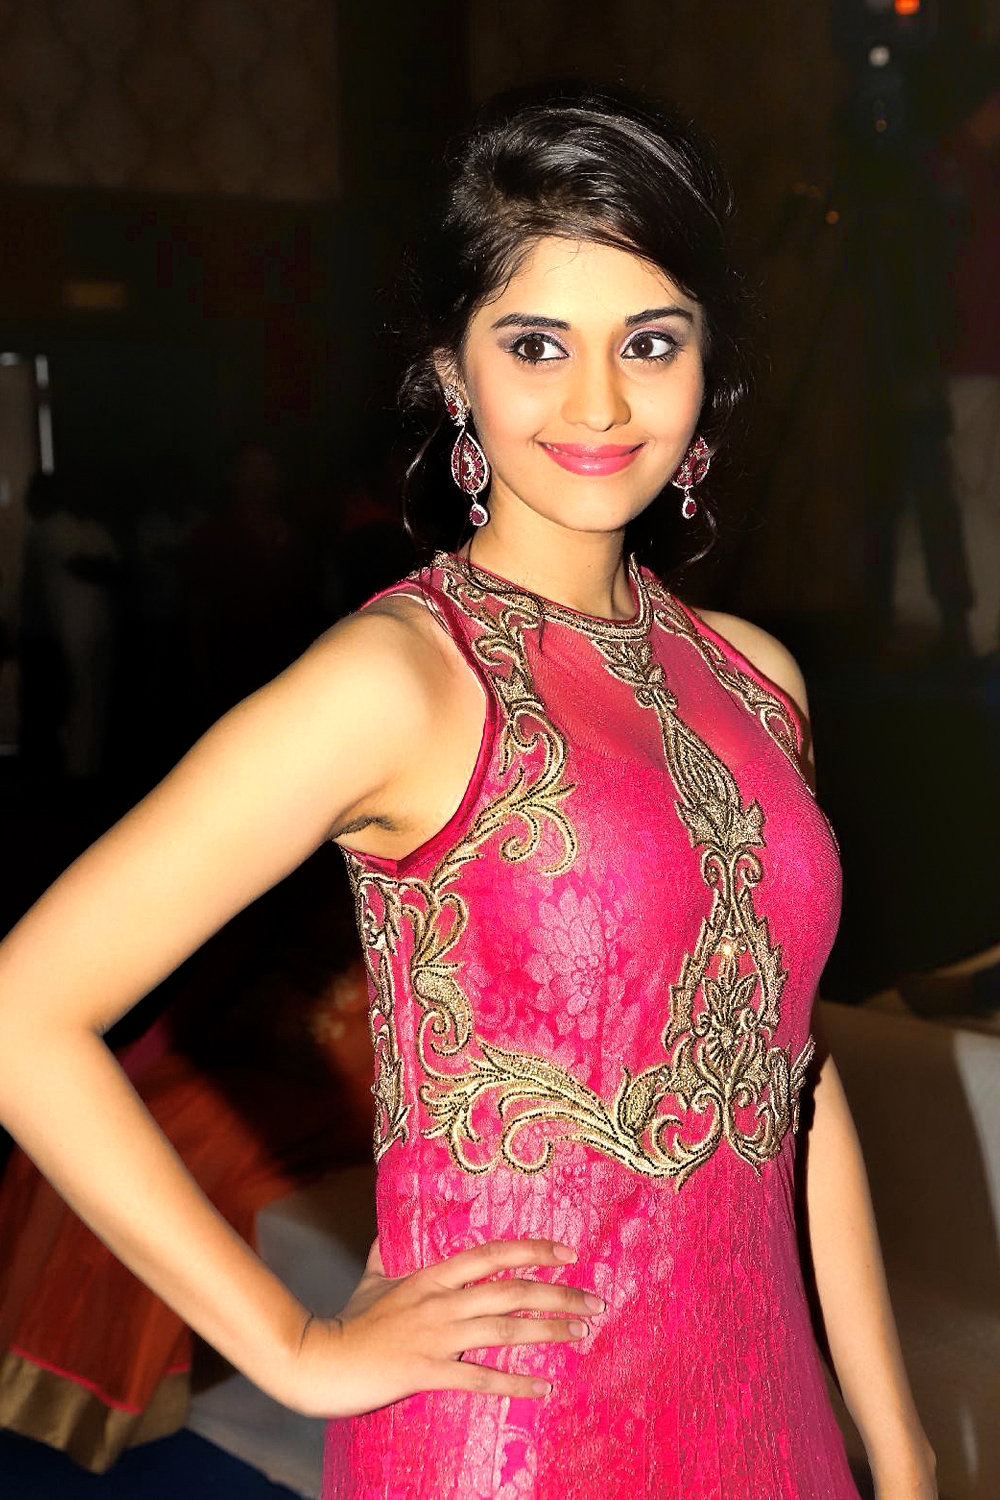 Surabhi Hd Wallpapers Hd Wallpapers High Definition Free Background